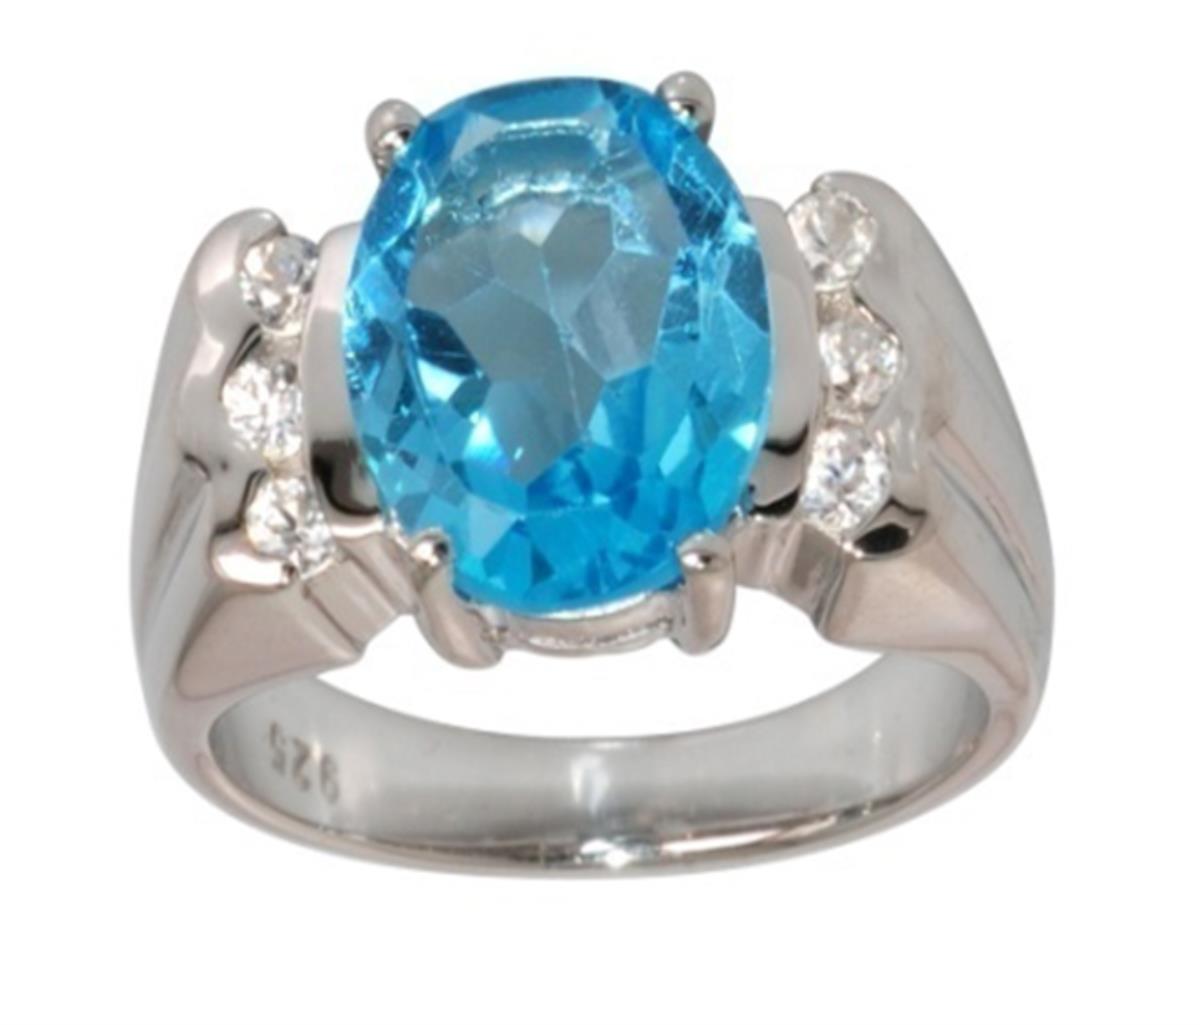 Sterling Silver Rhodium 11x9mm Oval Cut Sky Blue Topaz with Triple Rd White Zircon Sides Fashion Ring